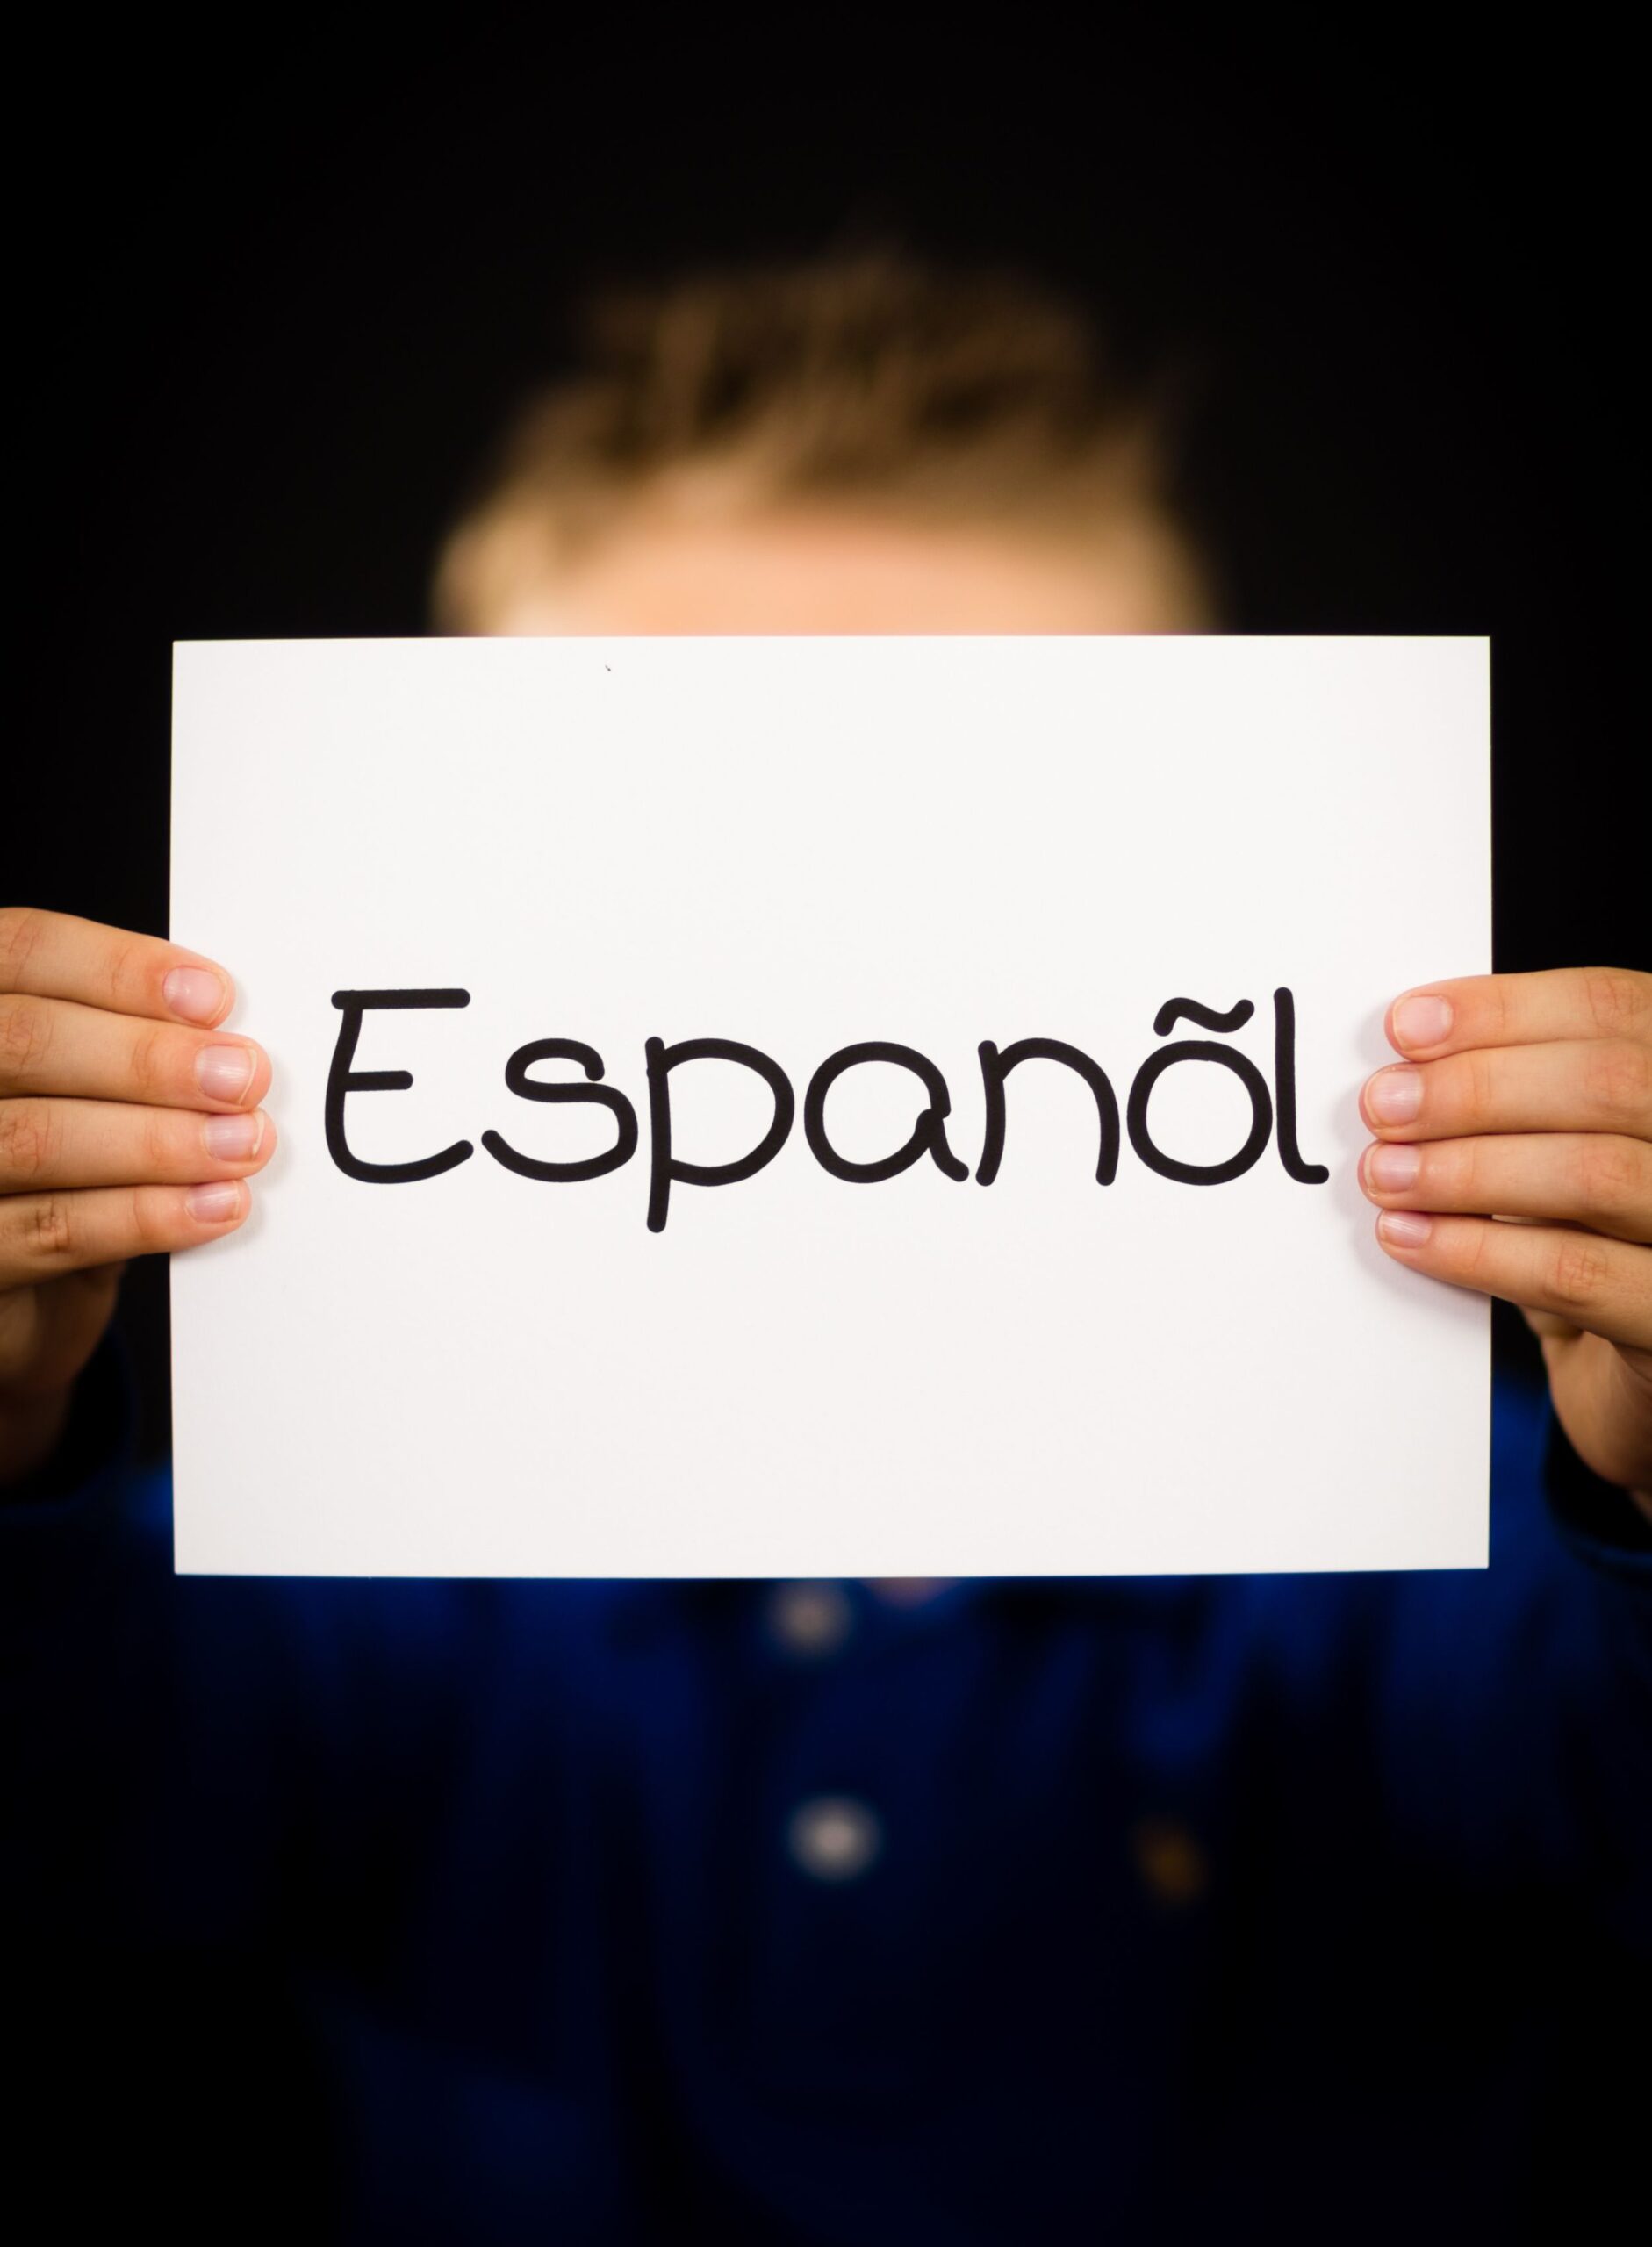 Spanish text reading 'Español' in bold letters.